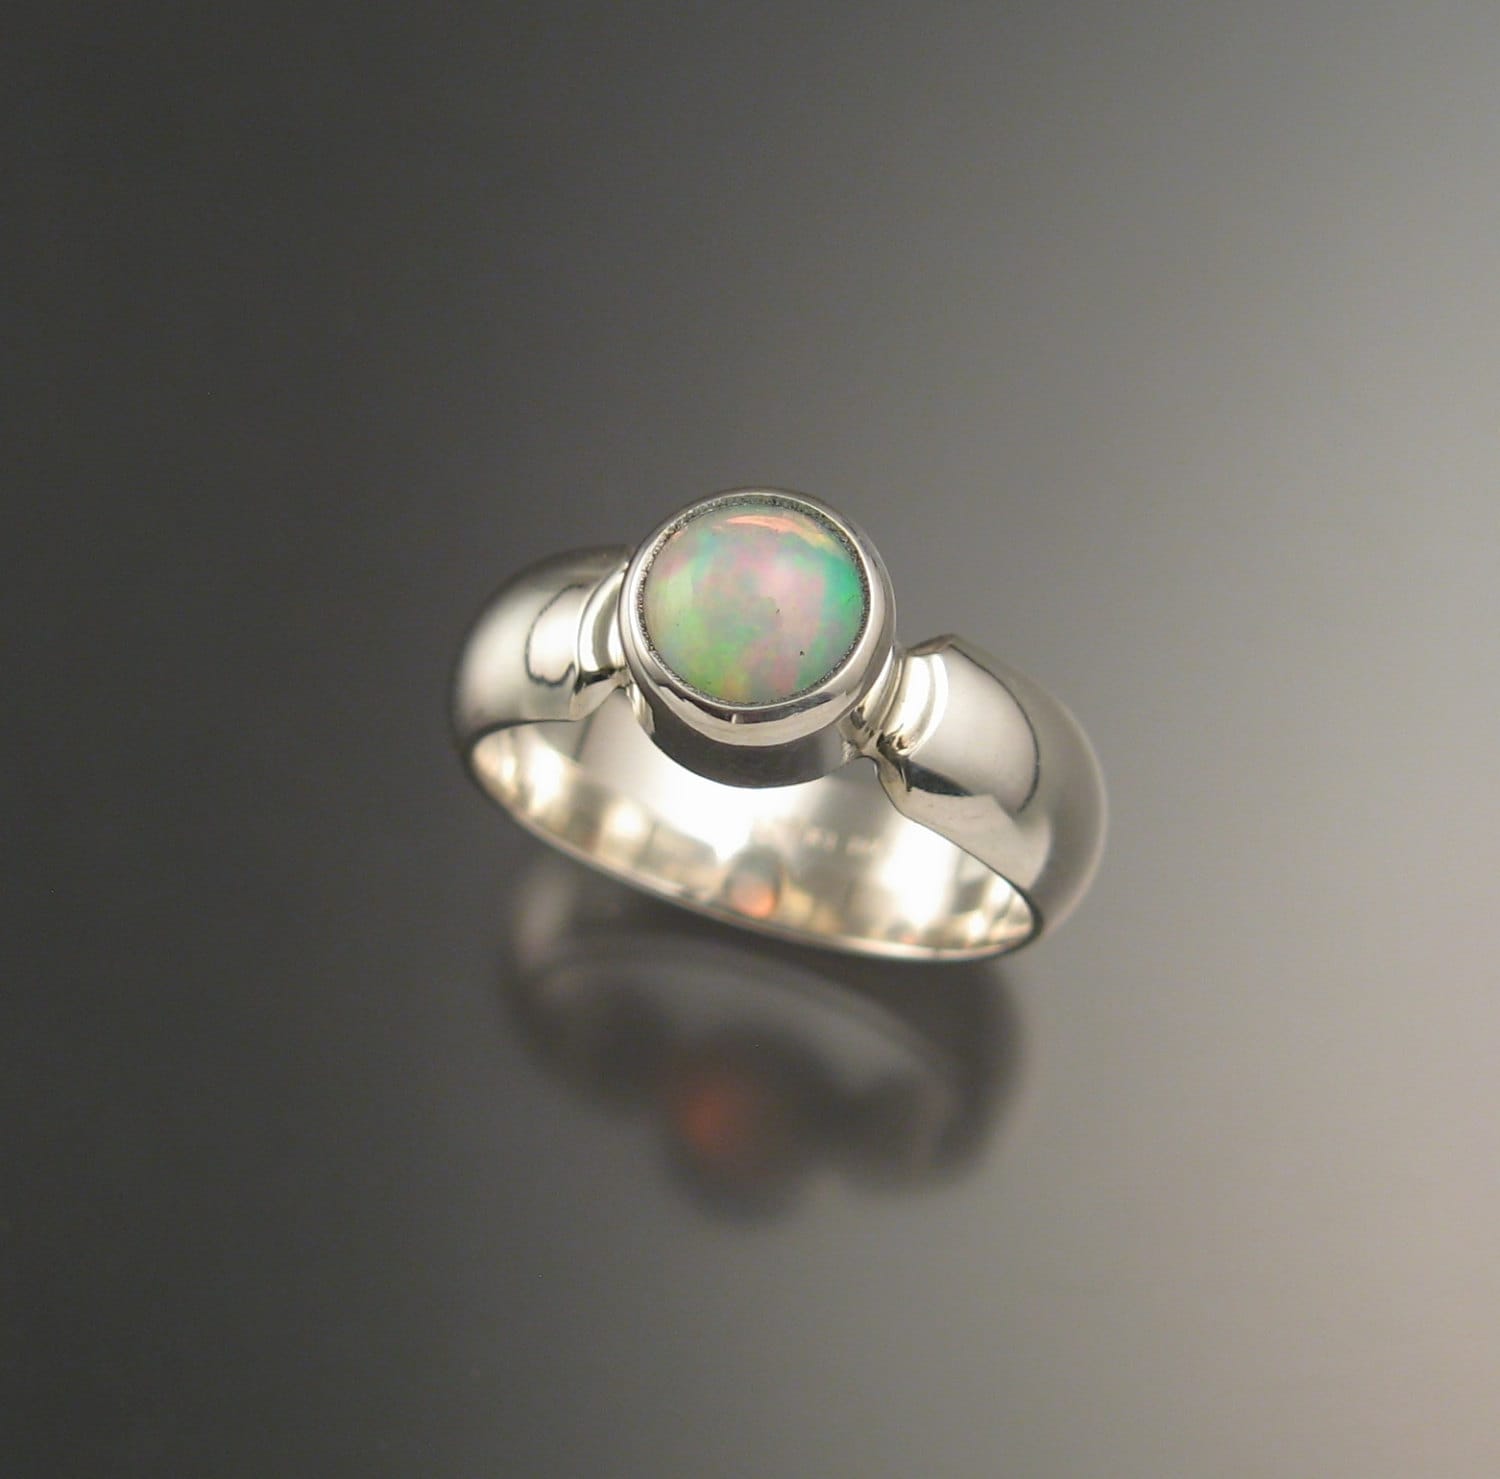 Opal Ring with wide low dome smooth band handmade in your size